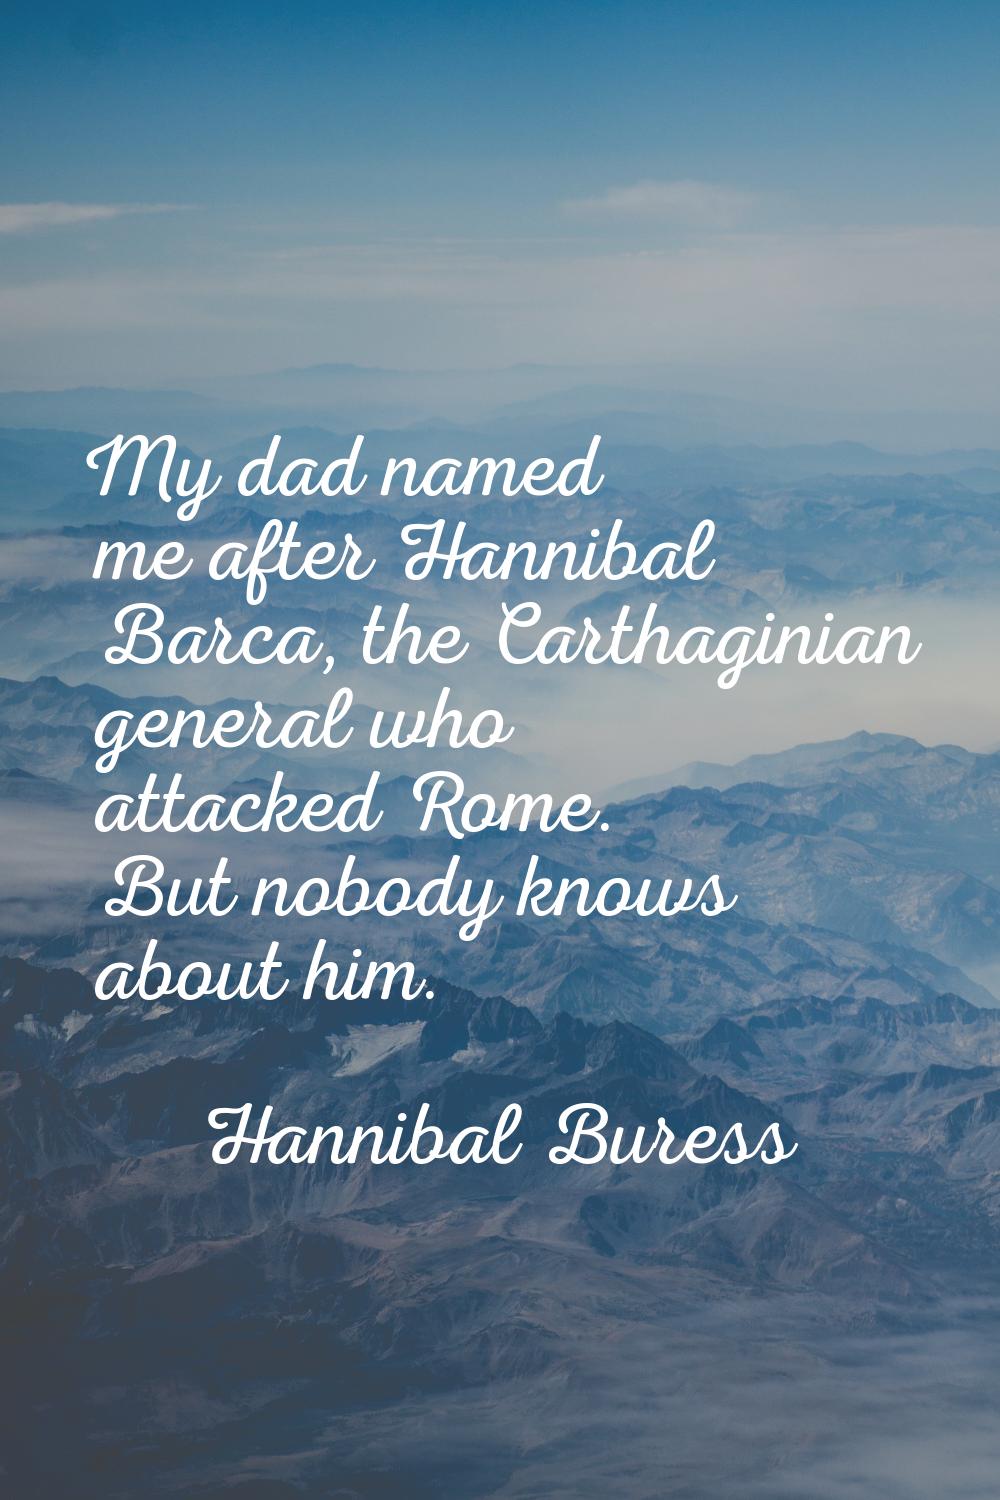 My dad named me after Hannibal Barca, the Carthaginian general who attacked Rome. But nobody knows 